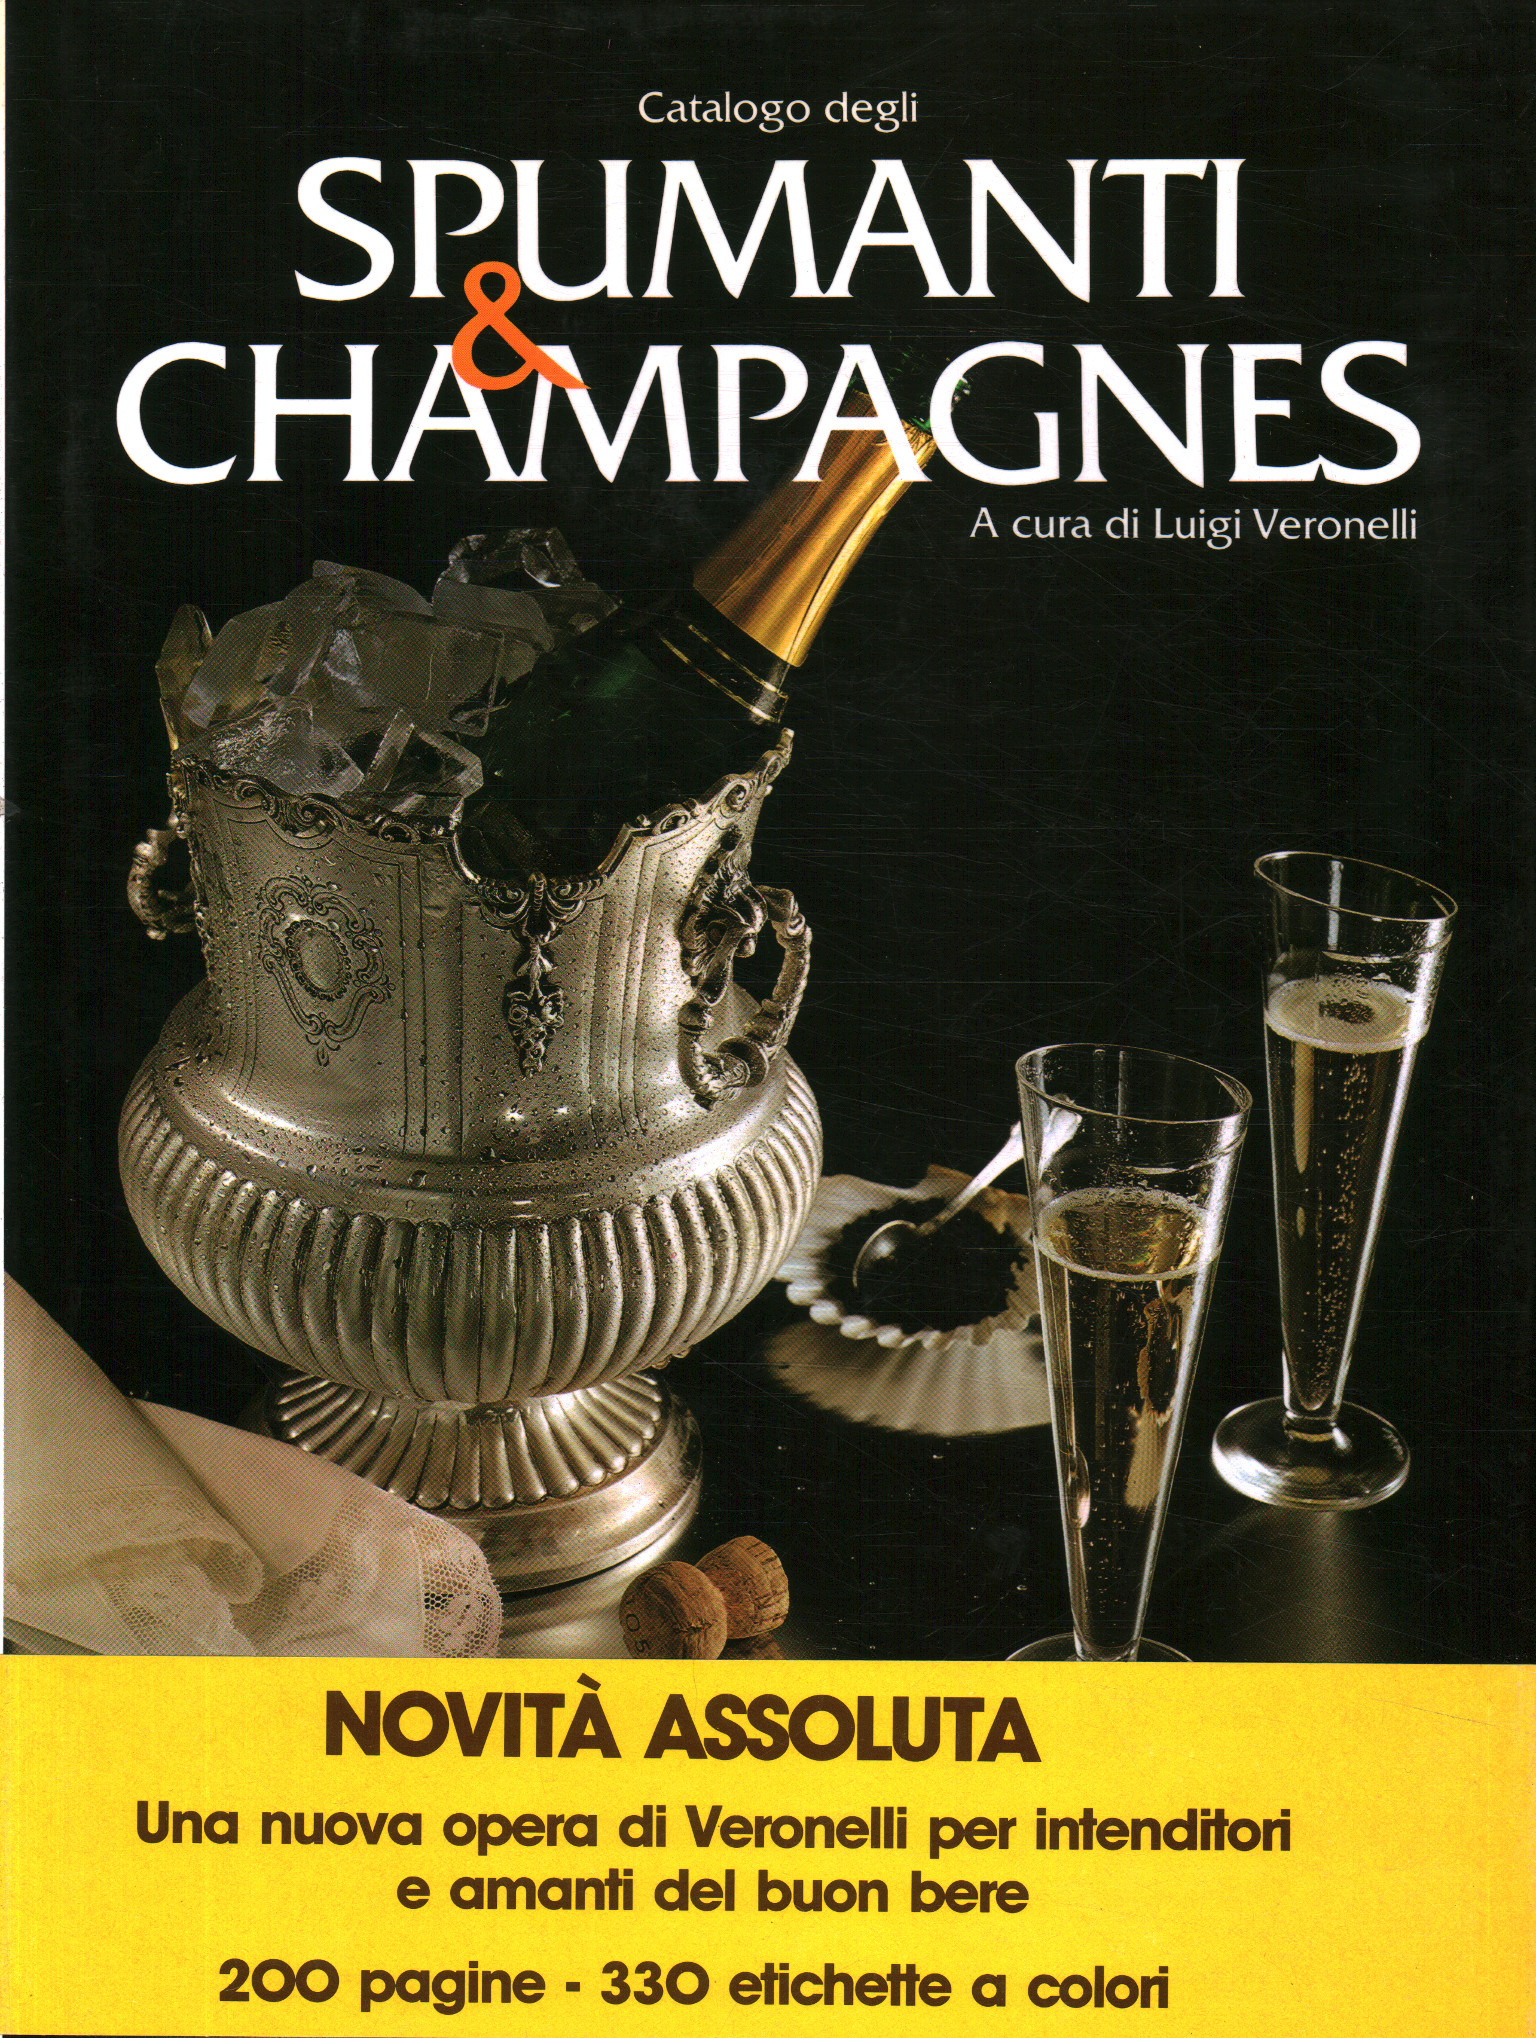 Catalog of sparkling wines & champagnes